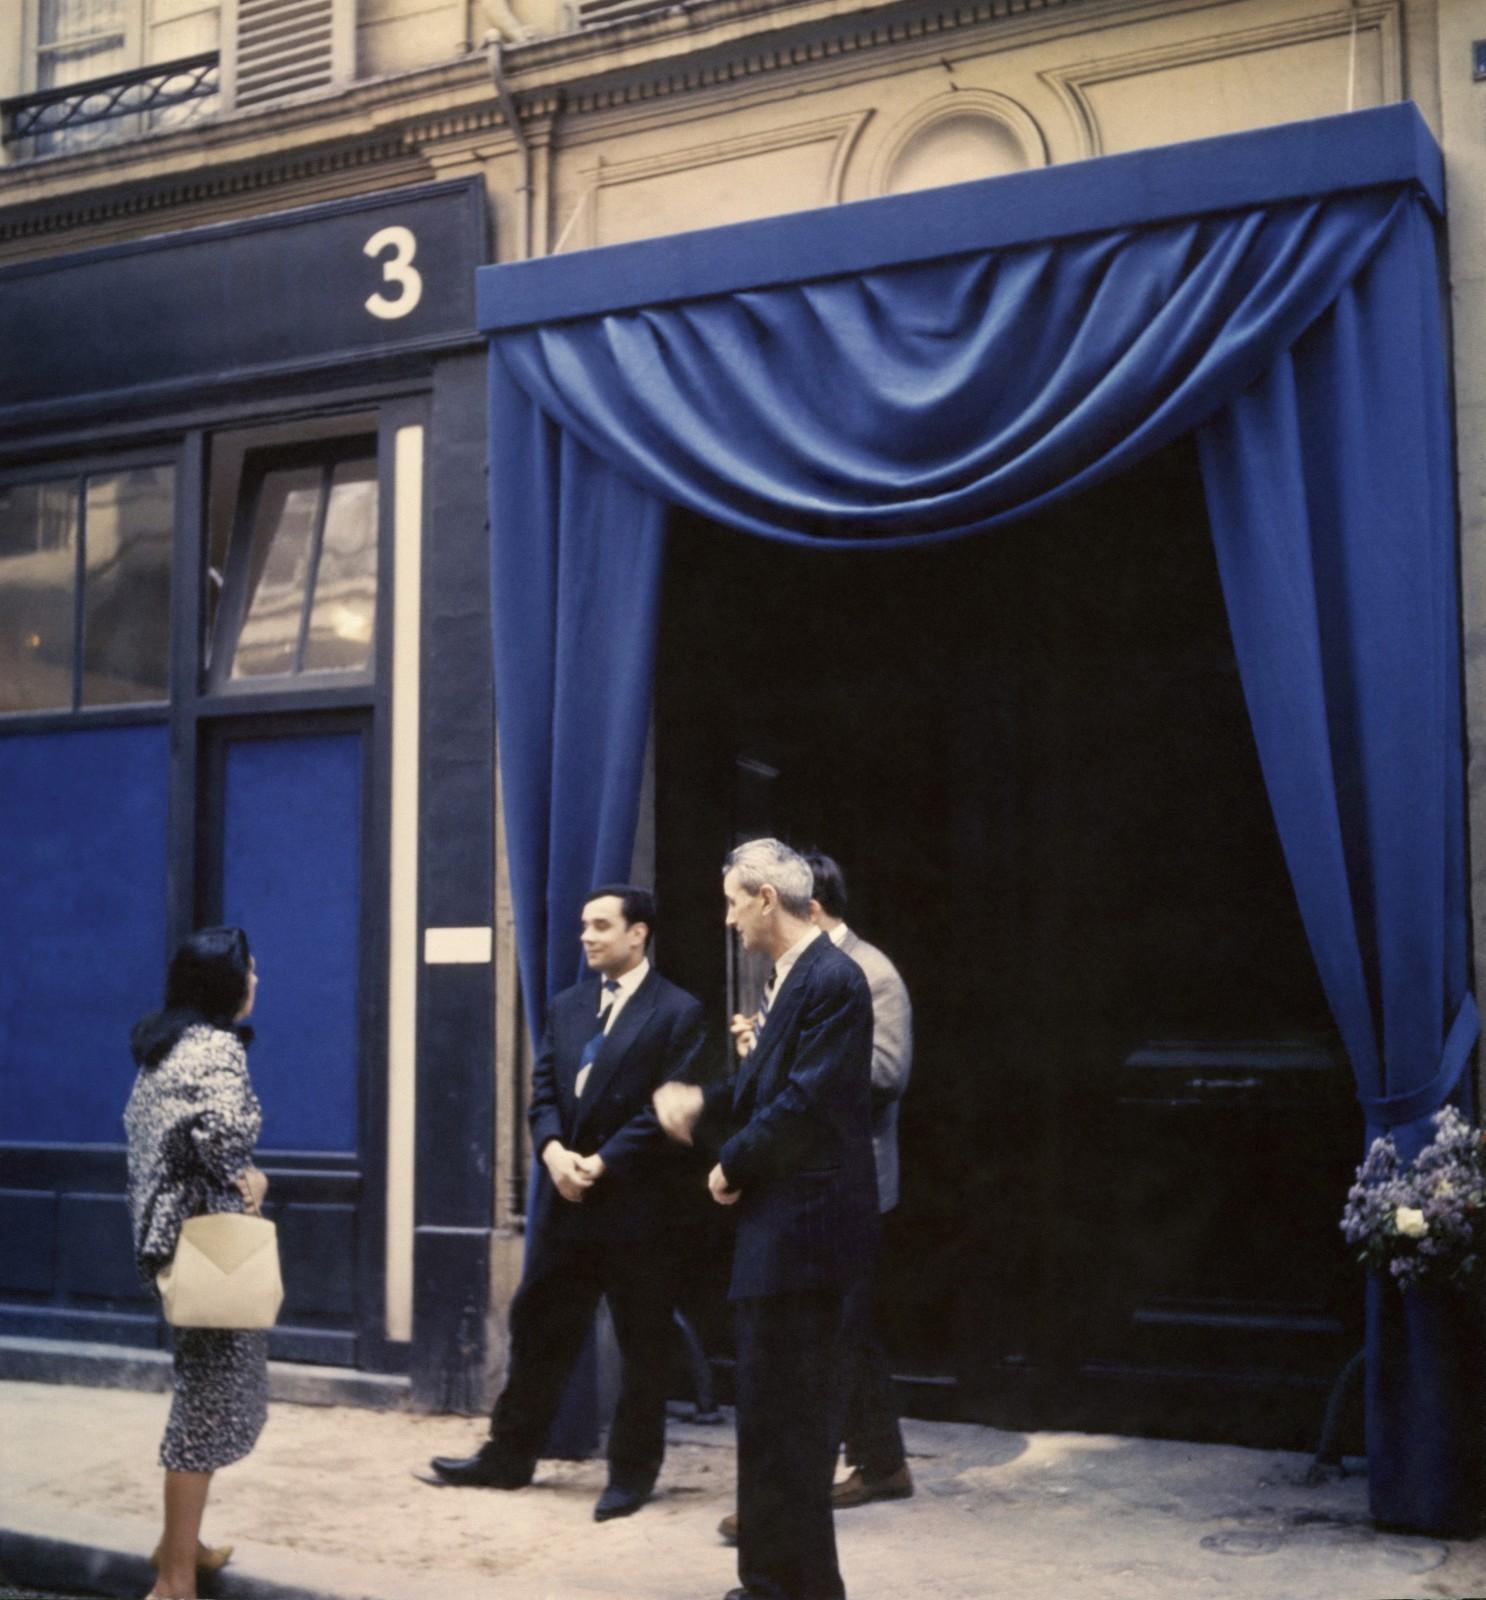 Entrance of Iris Clert gallery, during the opening of the "Void" exhibition, Paris, 1958